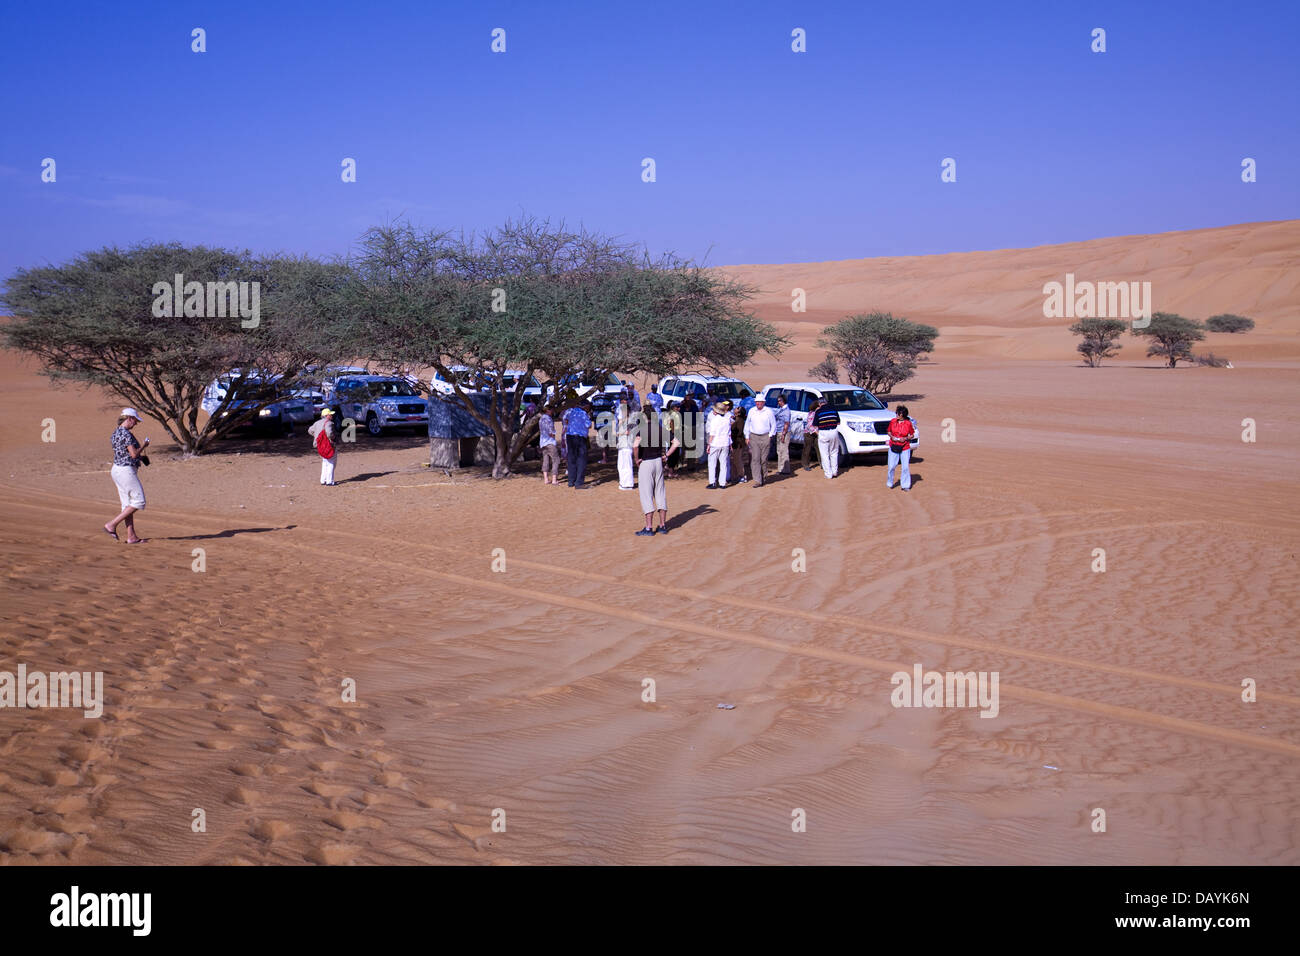 The Sharqiya (fomerly Wahiba) Sands, are a popular destination for 4WD safaris originating in either of the two cities in Oman. Stock Photo